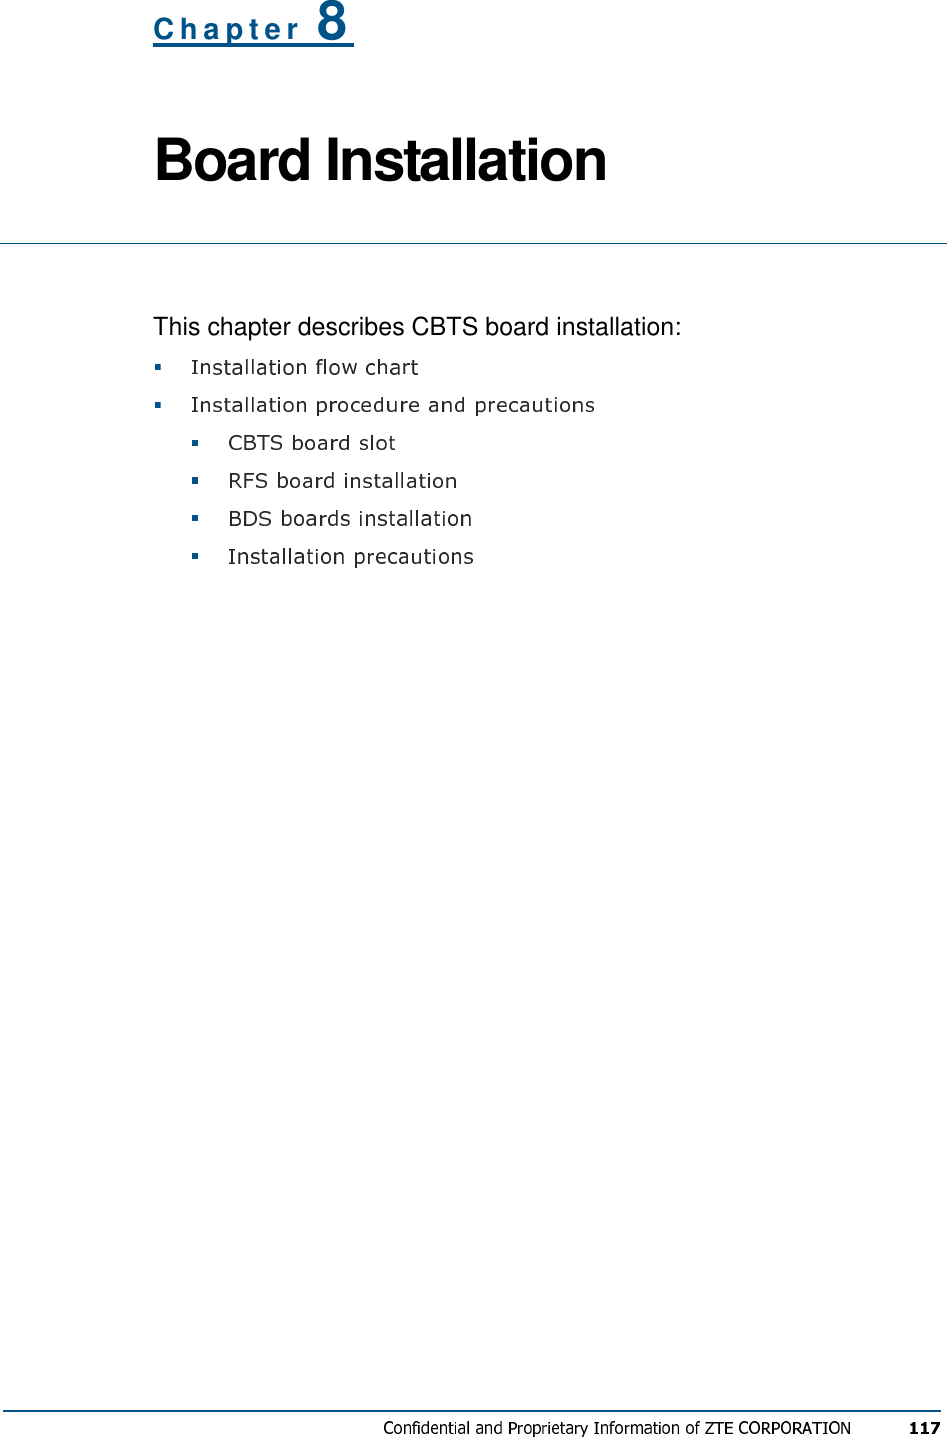 C h a p t e r   8 Board Installation   This chapter describes CBTS board installation:        